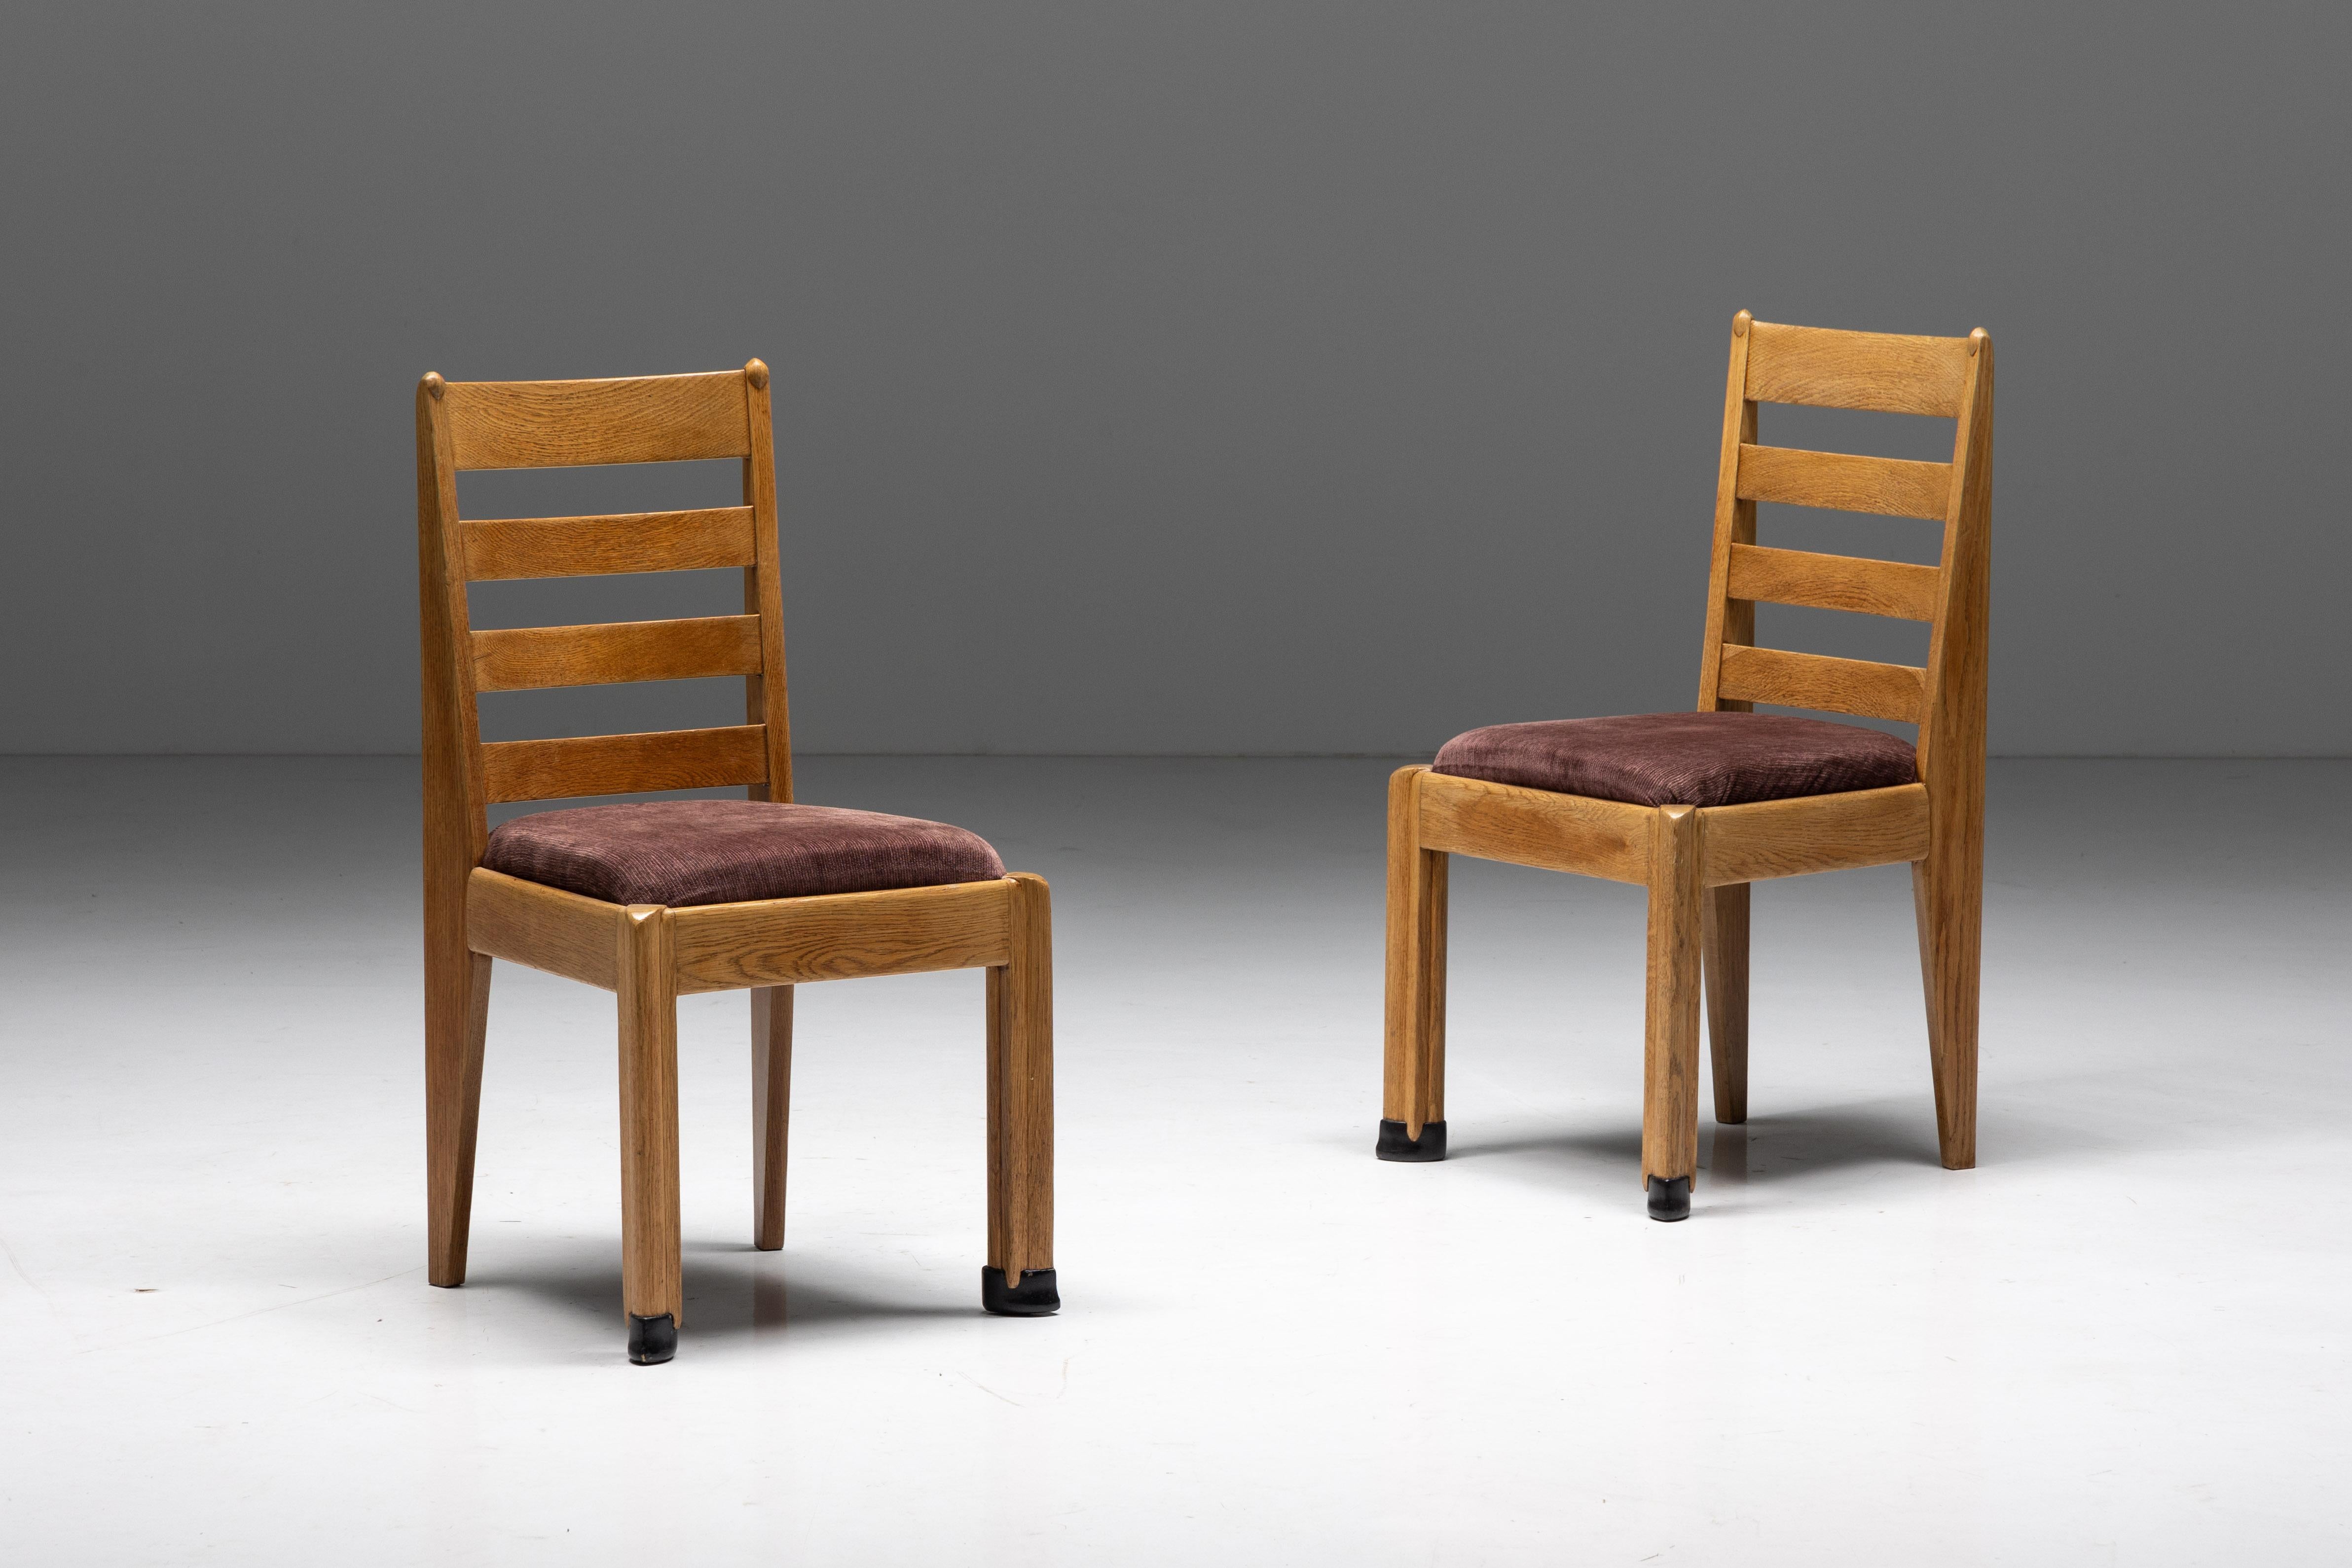 Oak dining chairs, Dutch Art Deco era, Hague school, 1928. Minimalist and modern for its time. Truly an Avant-Garde item. Certainly an inspiration for later Scandinavian Modern designers such as Axel Einar Hjorth. The name Rationalism is